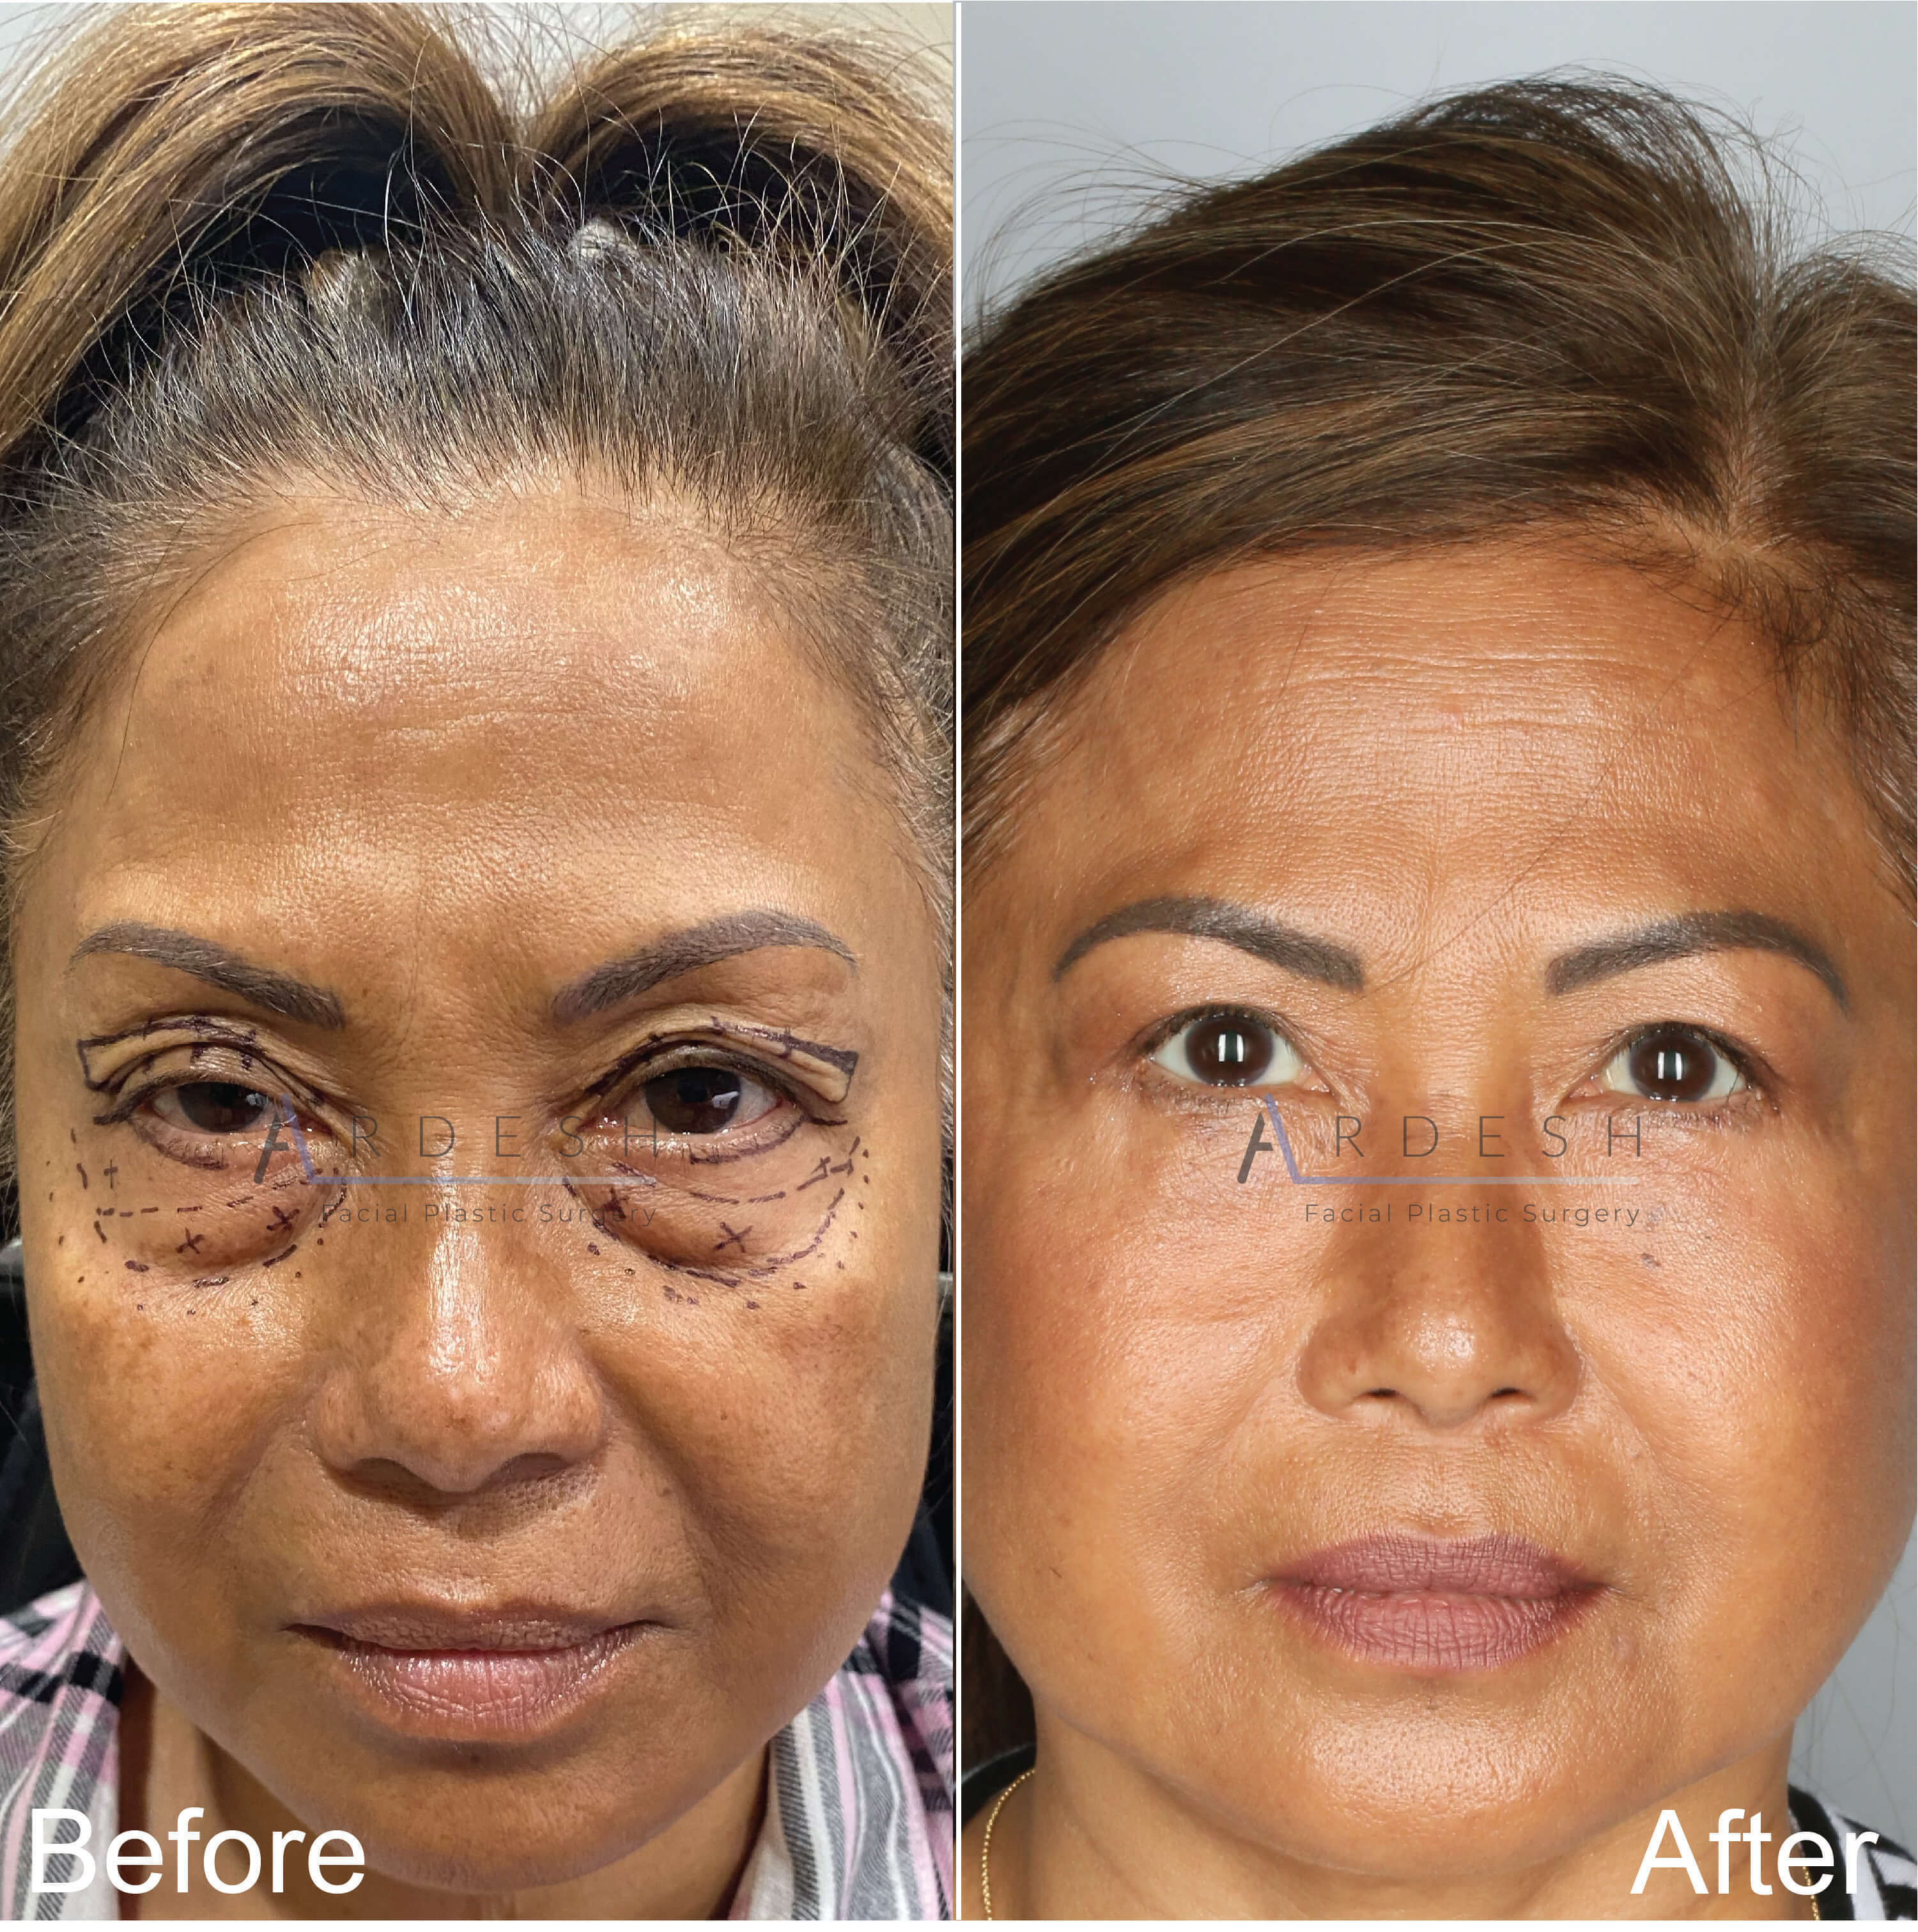 Eyelid Surgery Before and After | Ardesh Facial Plastic Surgery